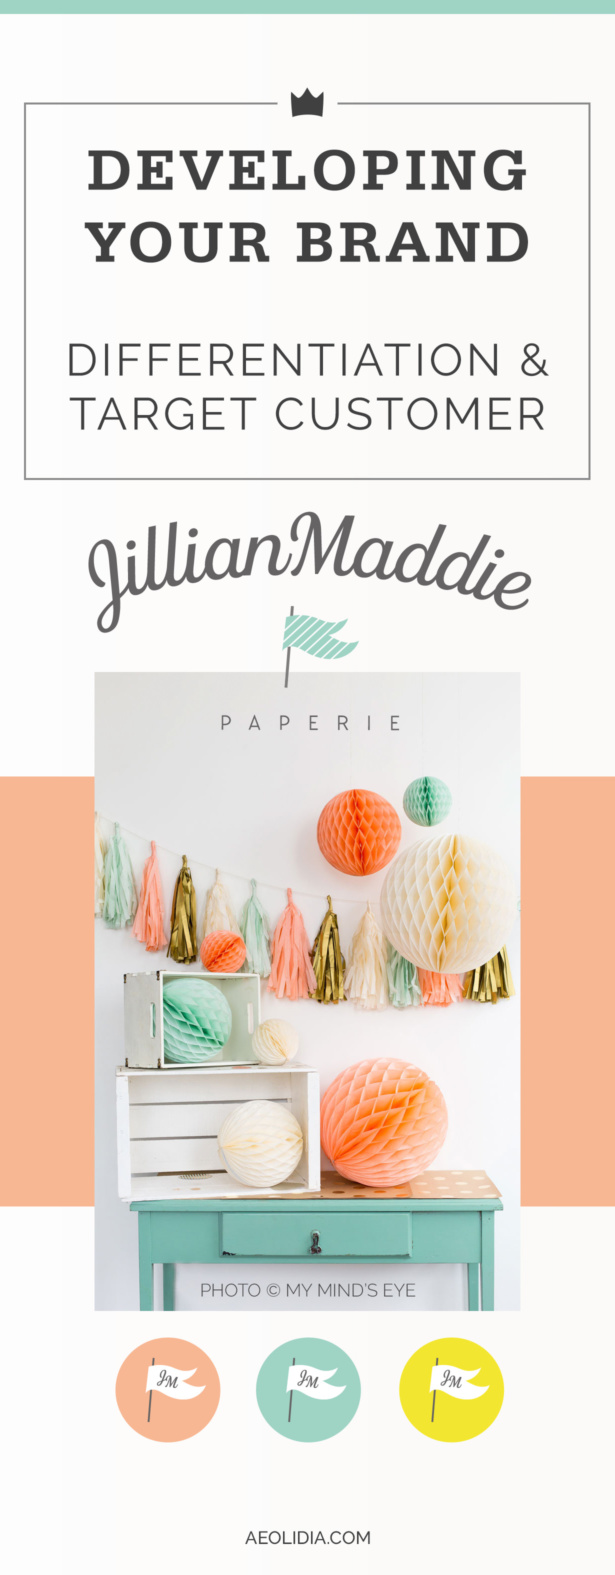 JillianMaddie Paperie is a new paper, packaging and party supply business. We worked to help differentiate this brand with a unique selling proposition, and to define a target customer profile.